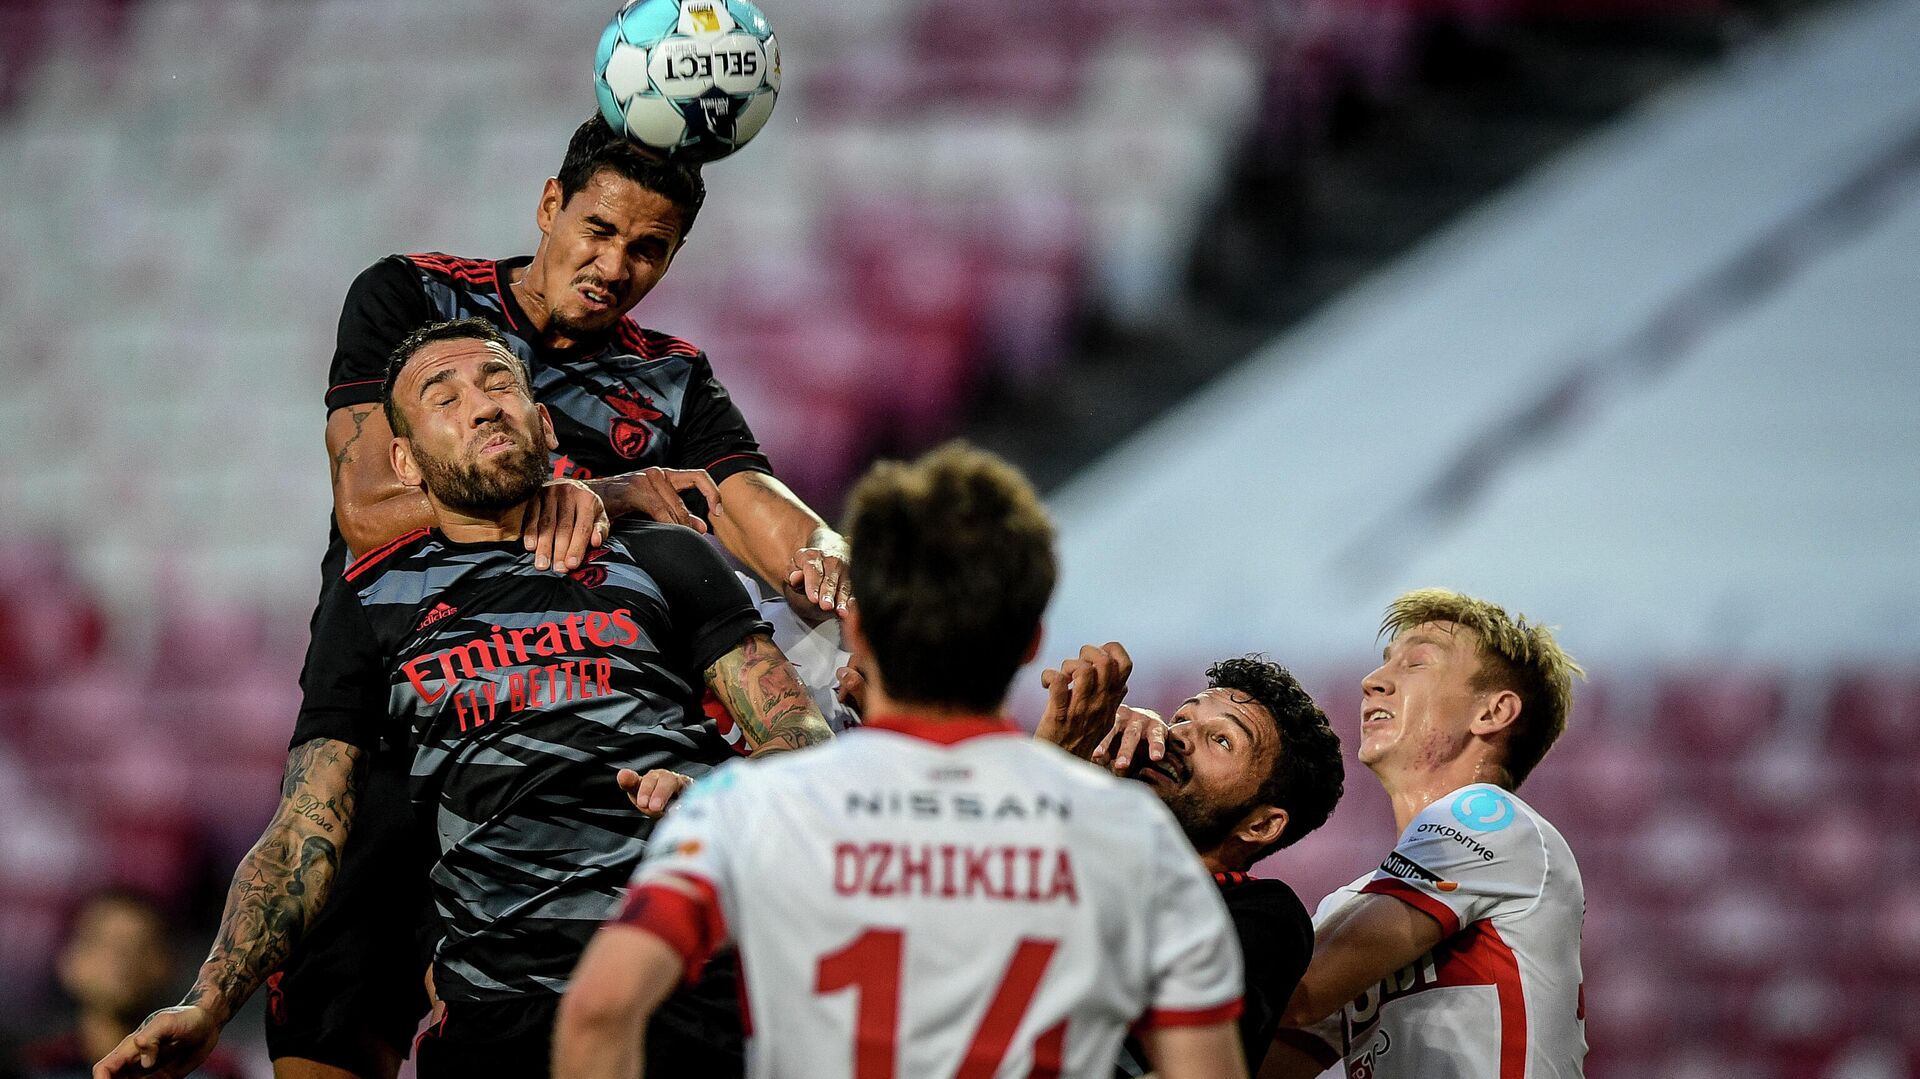 Benfica's Brazilian defender Lucas Verissimo (L) heads the ball during the UEFA Champions League third round second leg qualifying football match between SL Benfica and Spartak Moscow at the Luz stadium in Lisbon on August 10, 2021. (Photo by PATRICIA DE MELO MOREIRA / AFP) - РИА Новости, 1920, 10.08.2021